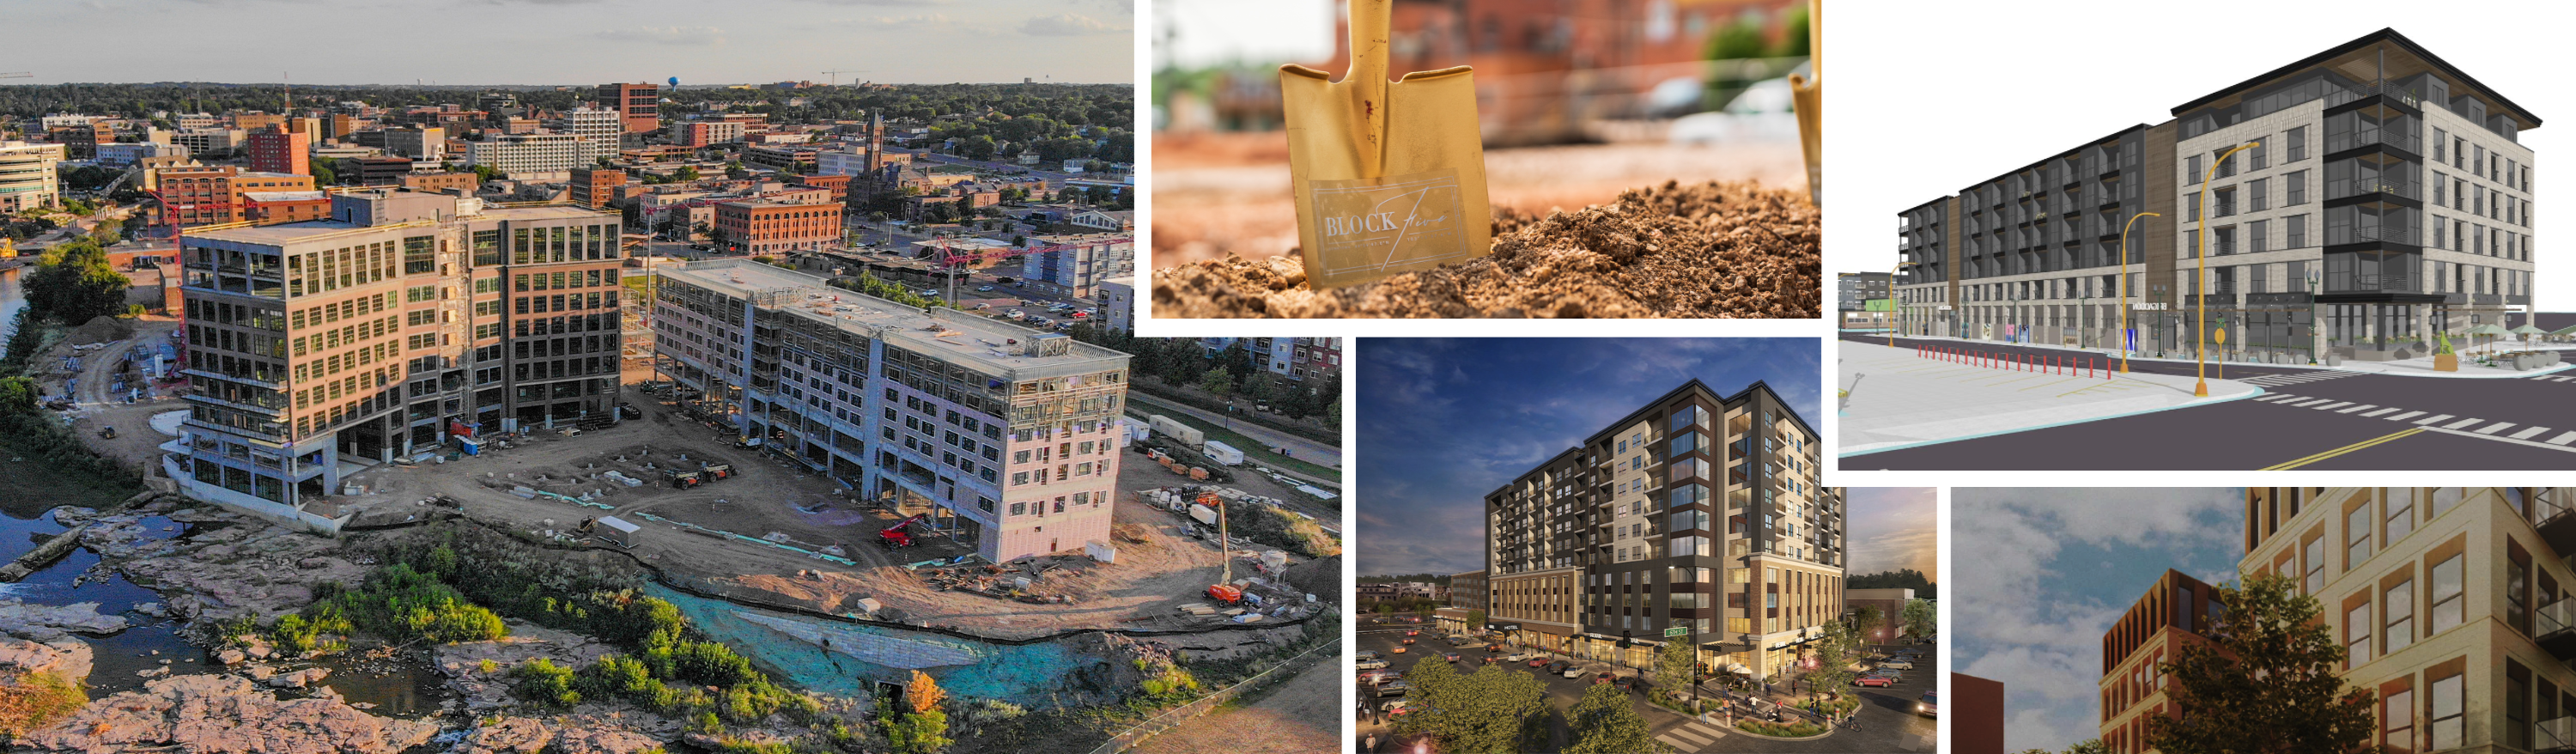 Four Ways Lloyd Companies Is Building For The Future Across Downtown Developments